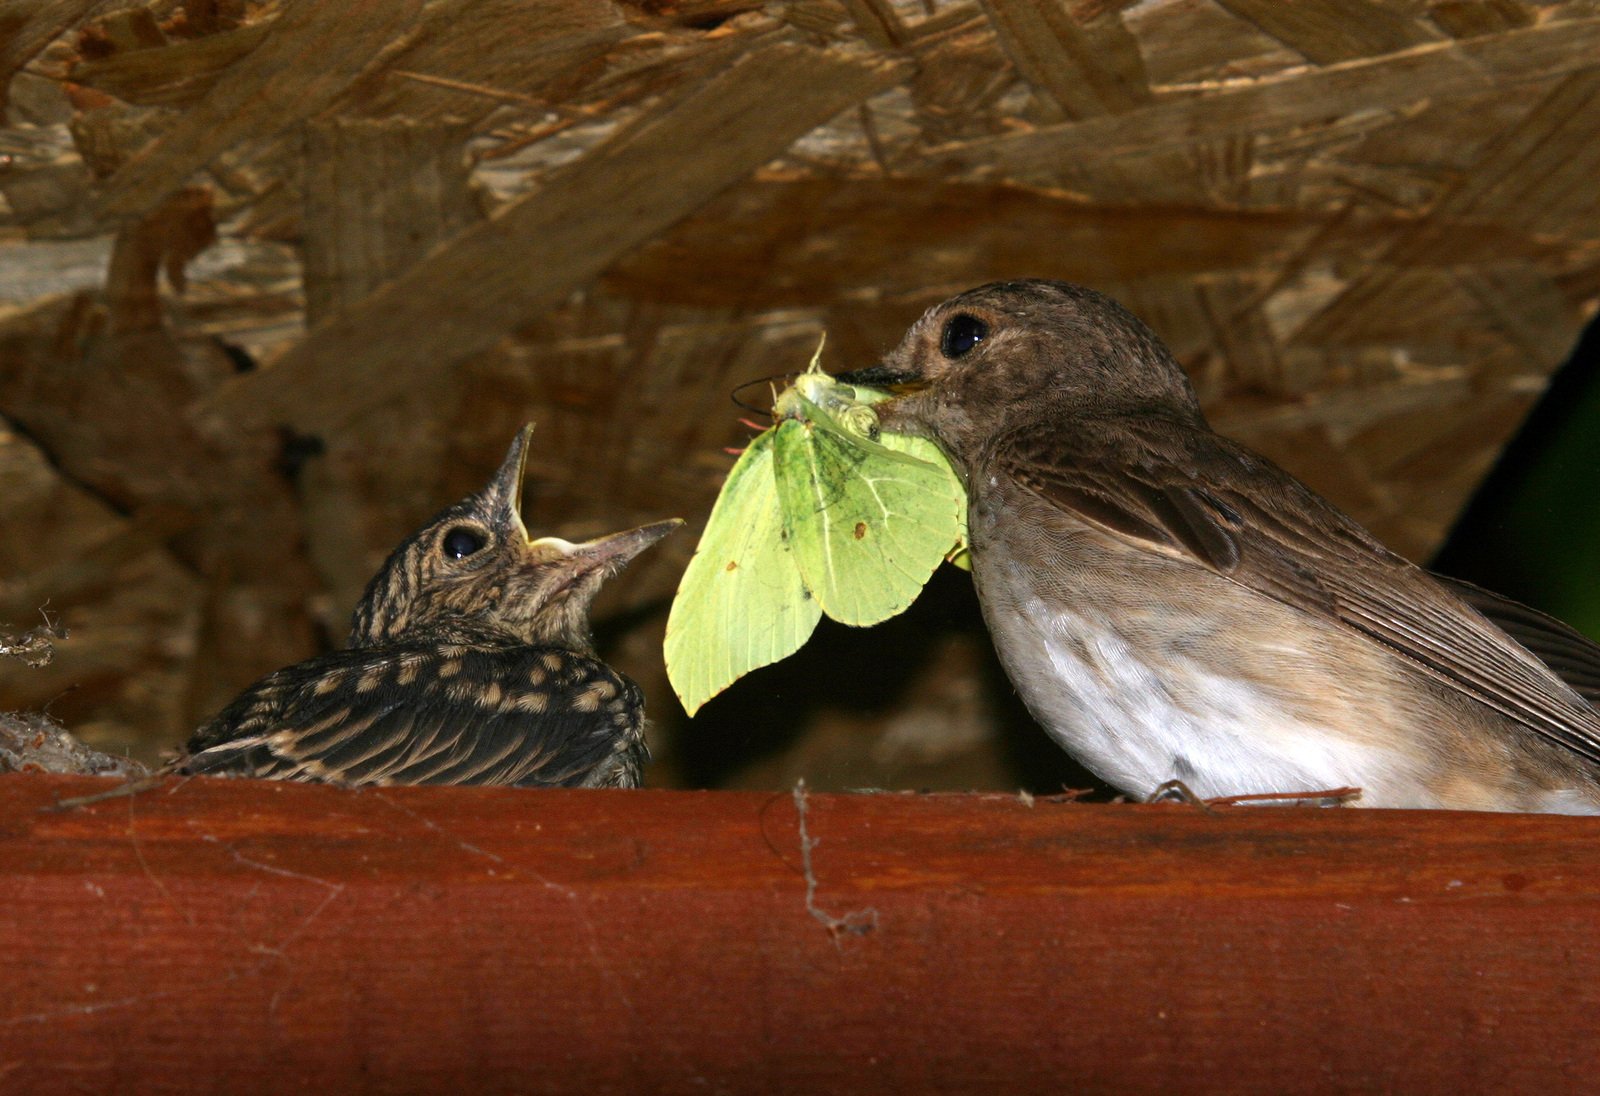 two birds, one brown and one green, are kissing